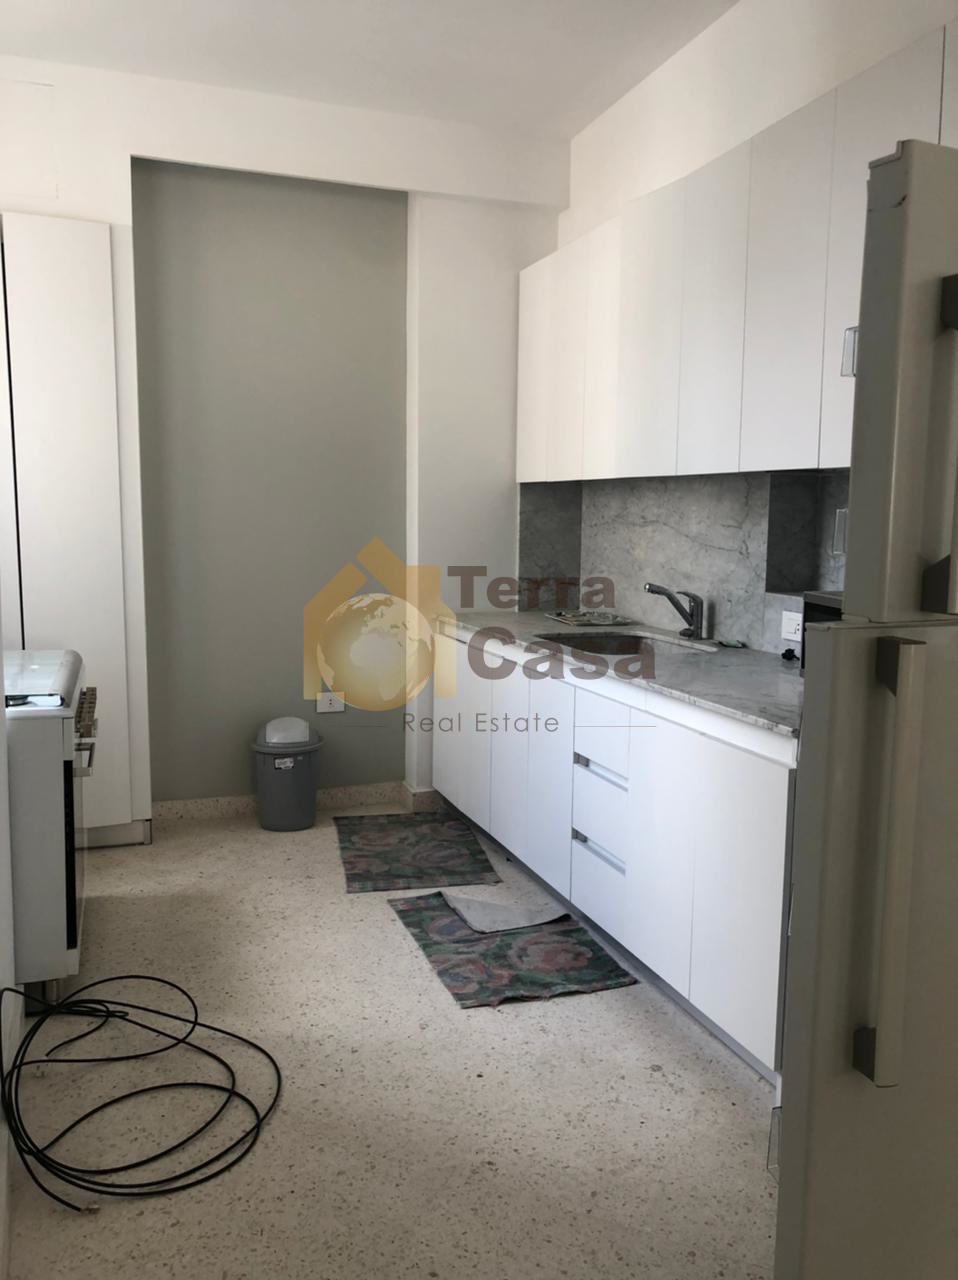 Fully furnished apartment cash payment.Ref# 2465